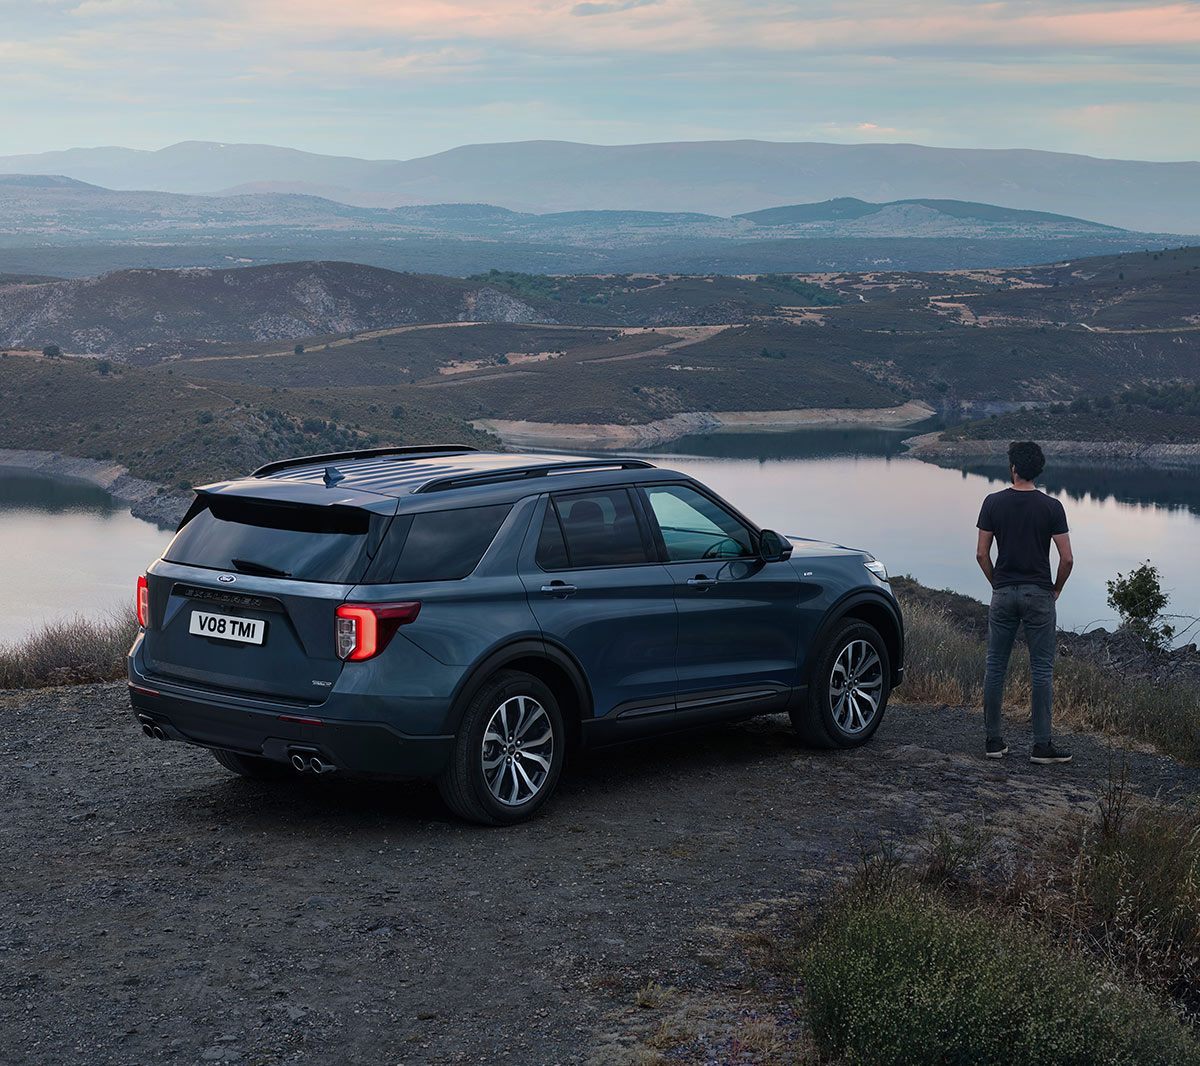 Ford Explorer parked in hilly area above lakes with person standing next to it overlooking landscape